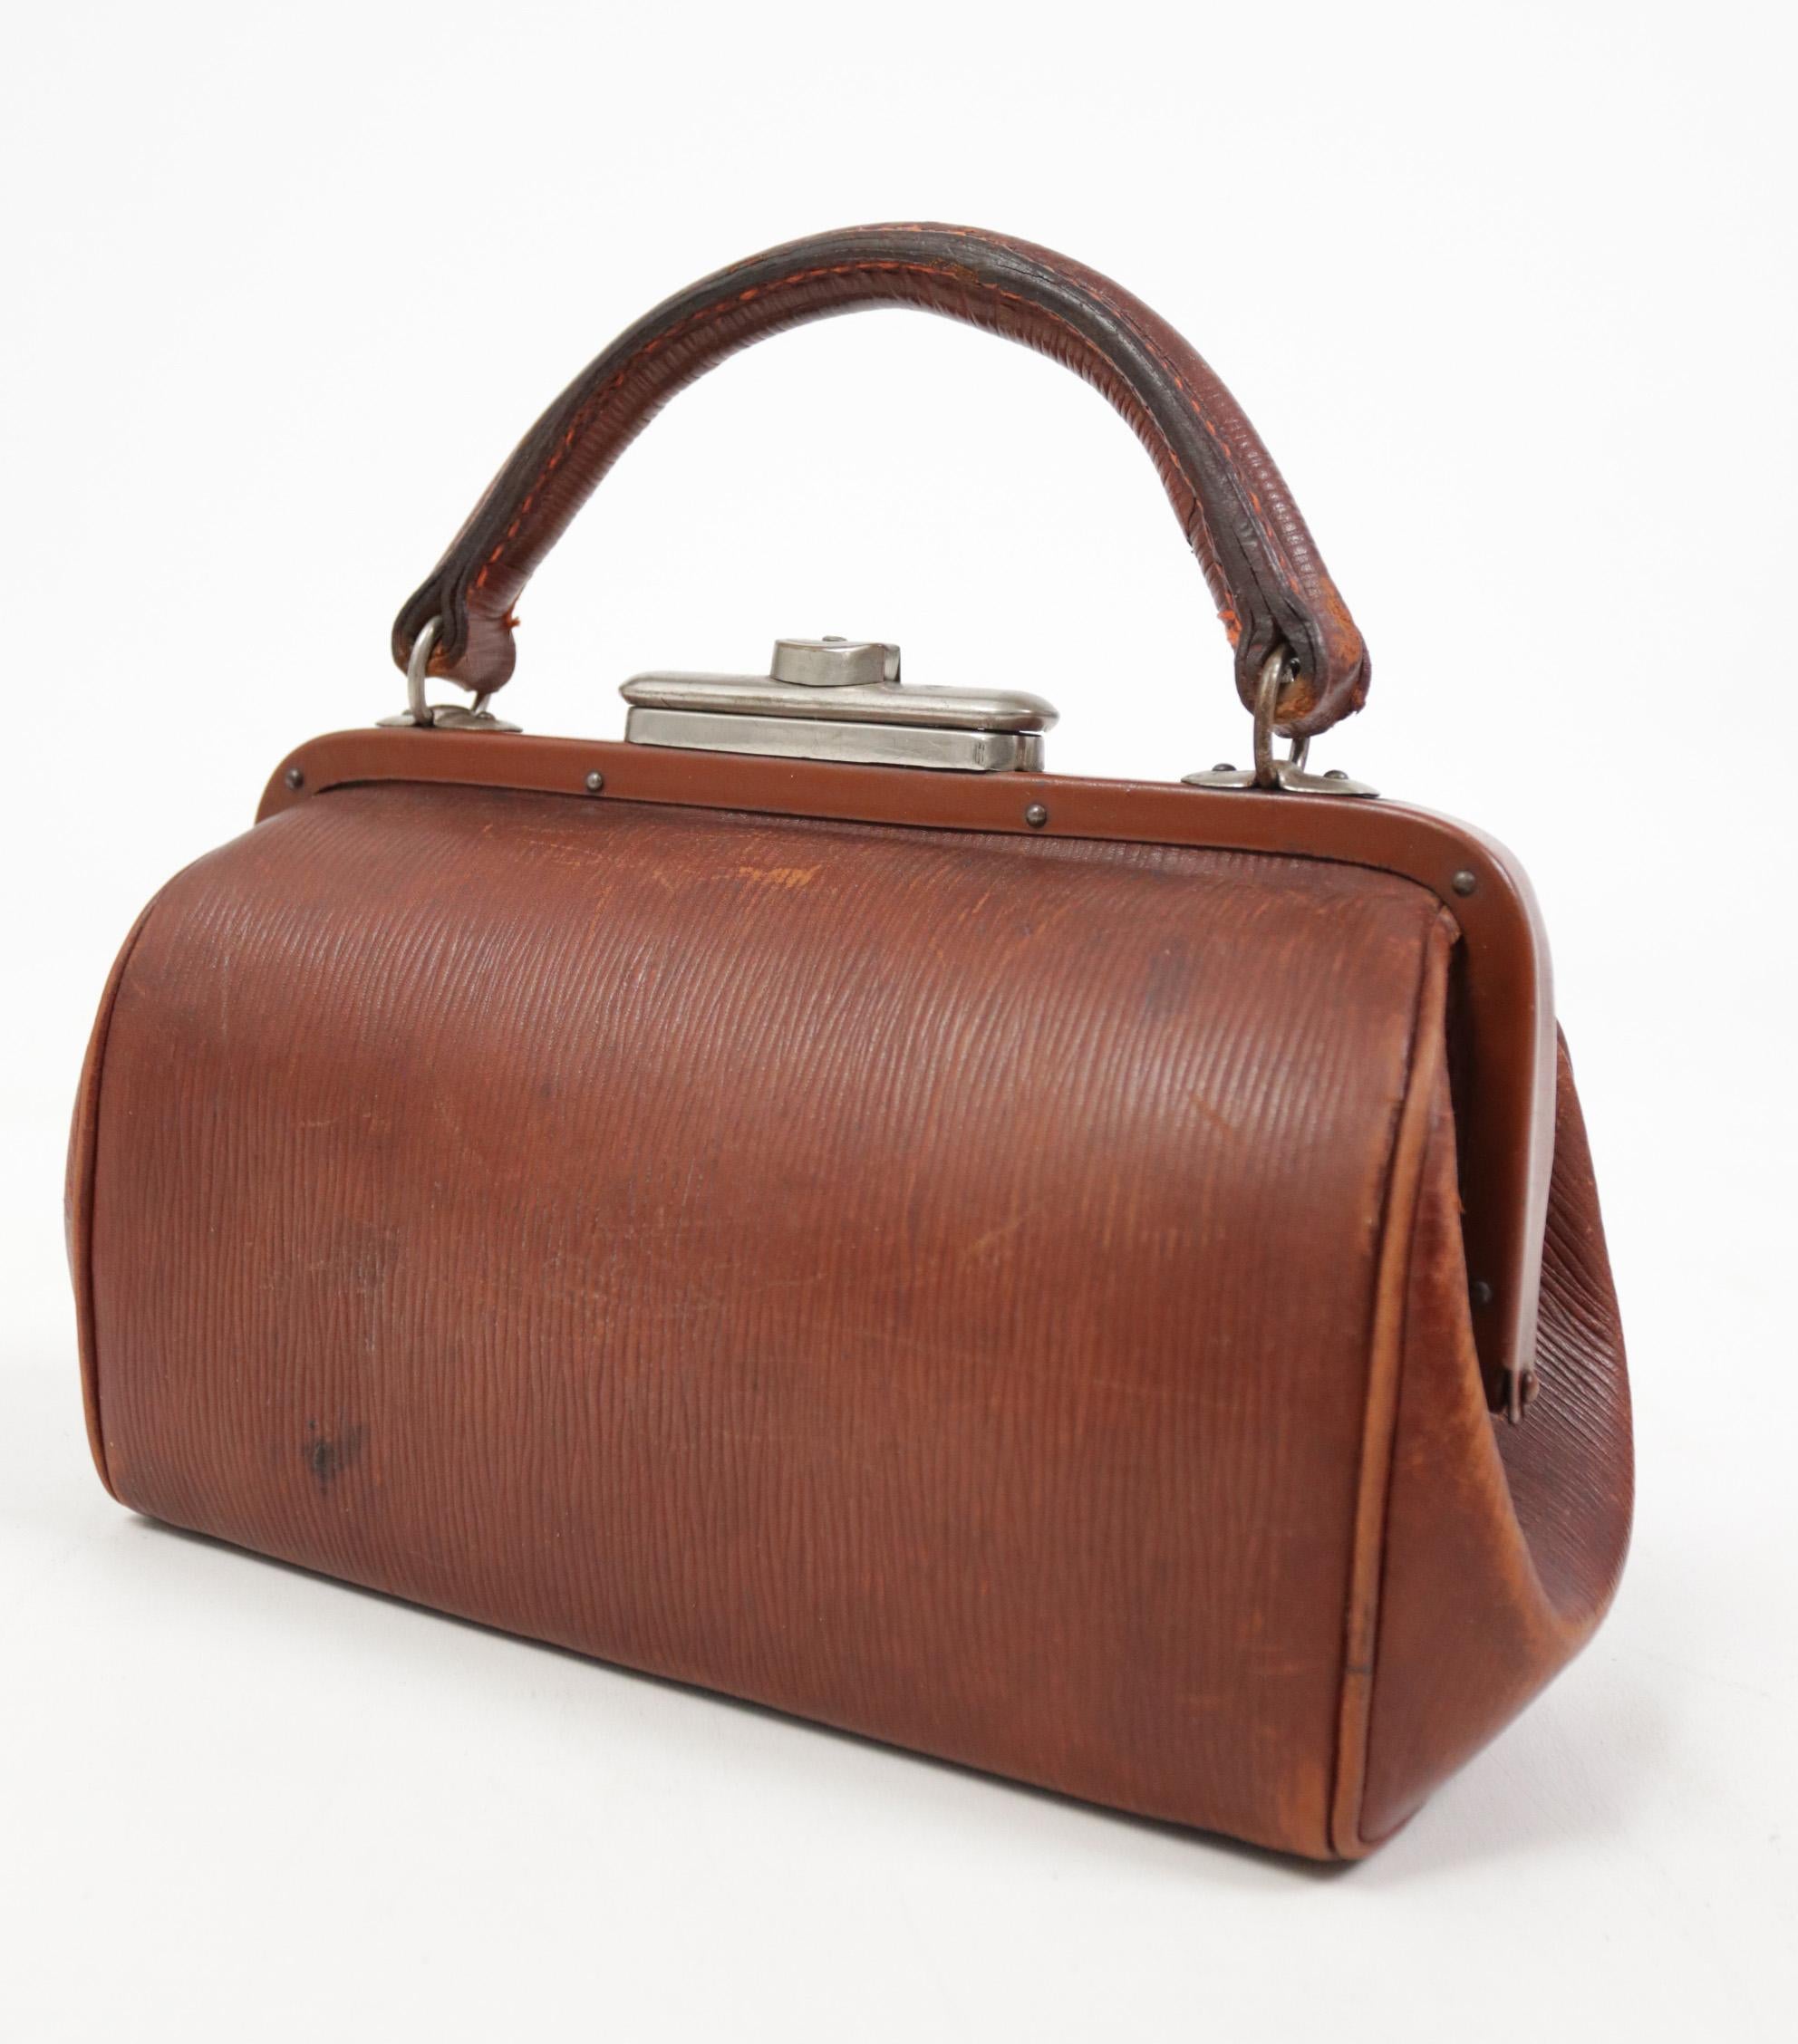 Early 20th Century Art Deco Ribbed Leather Brown Handbag c. 1920 For Sale